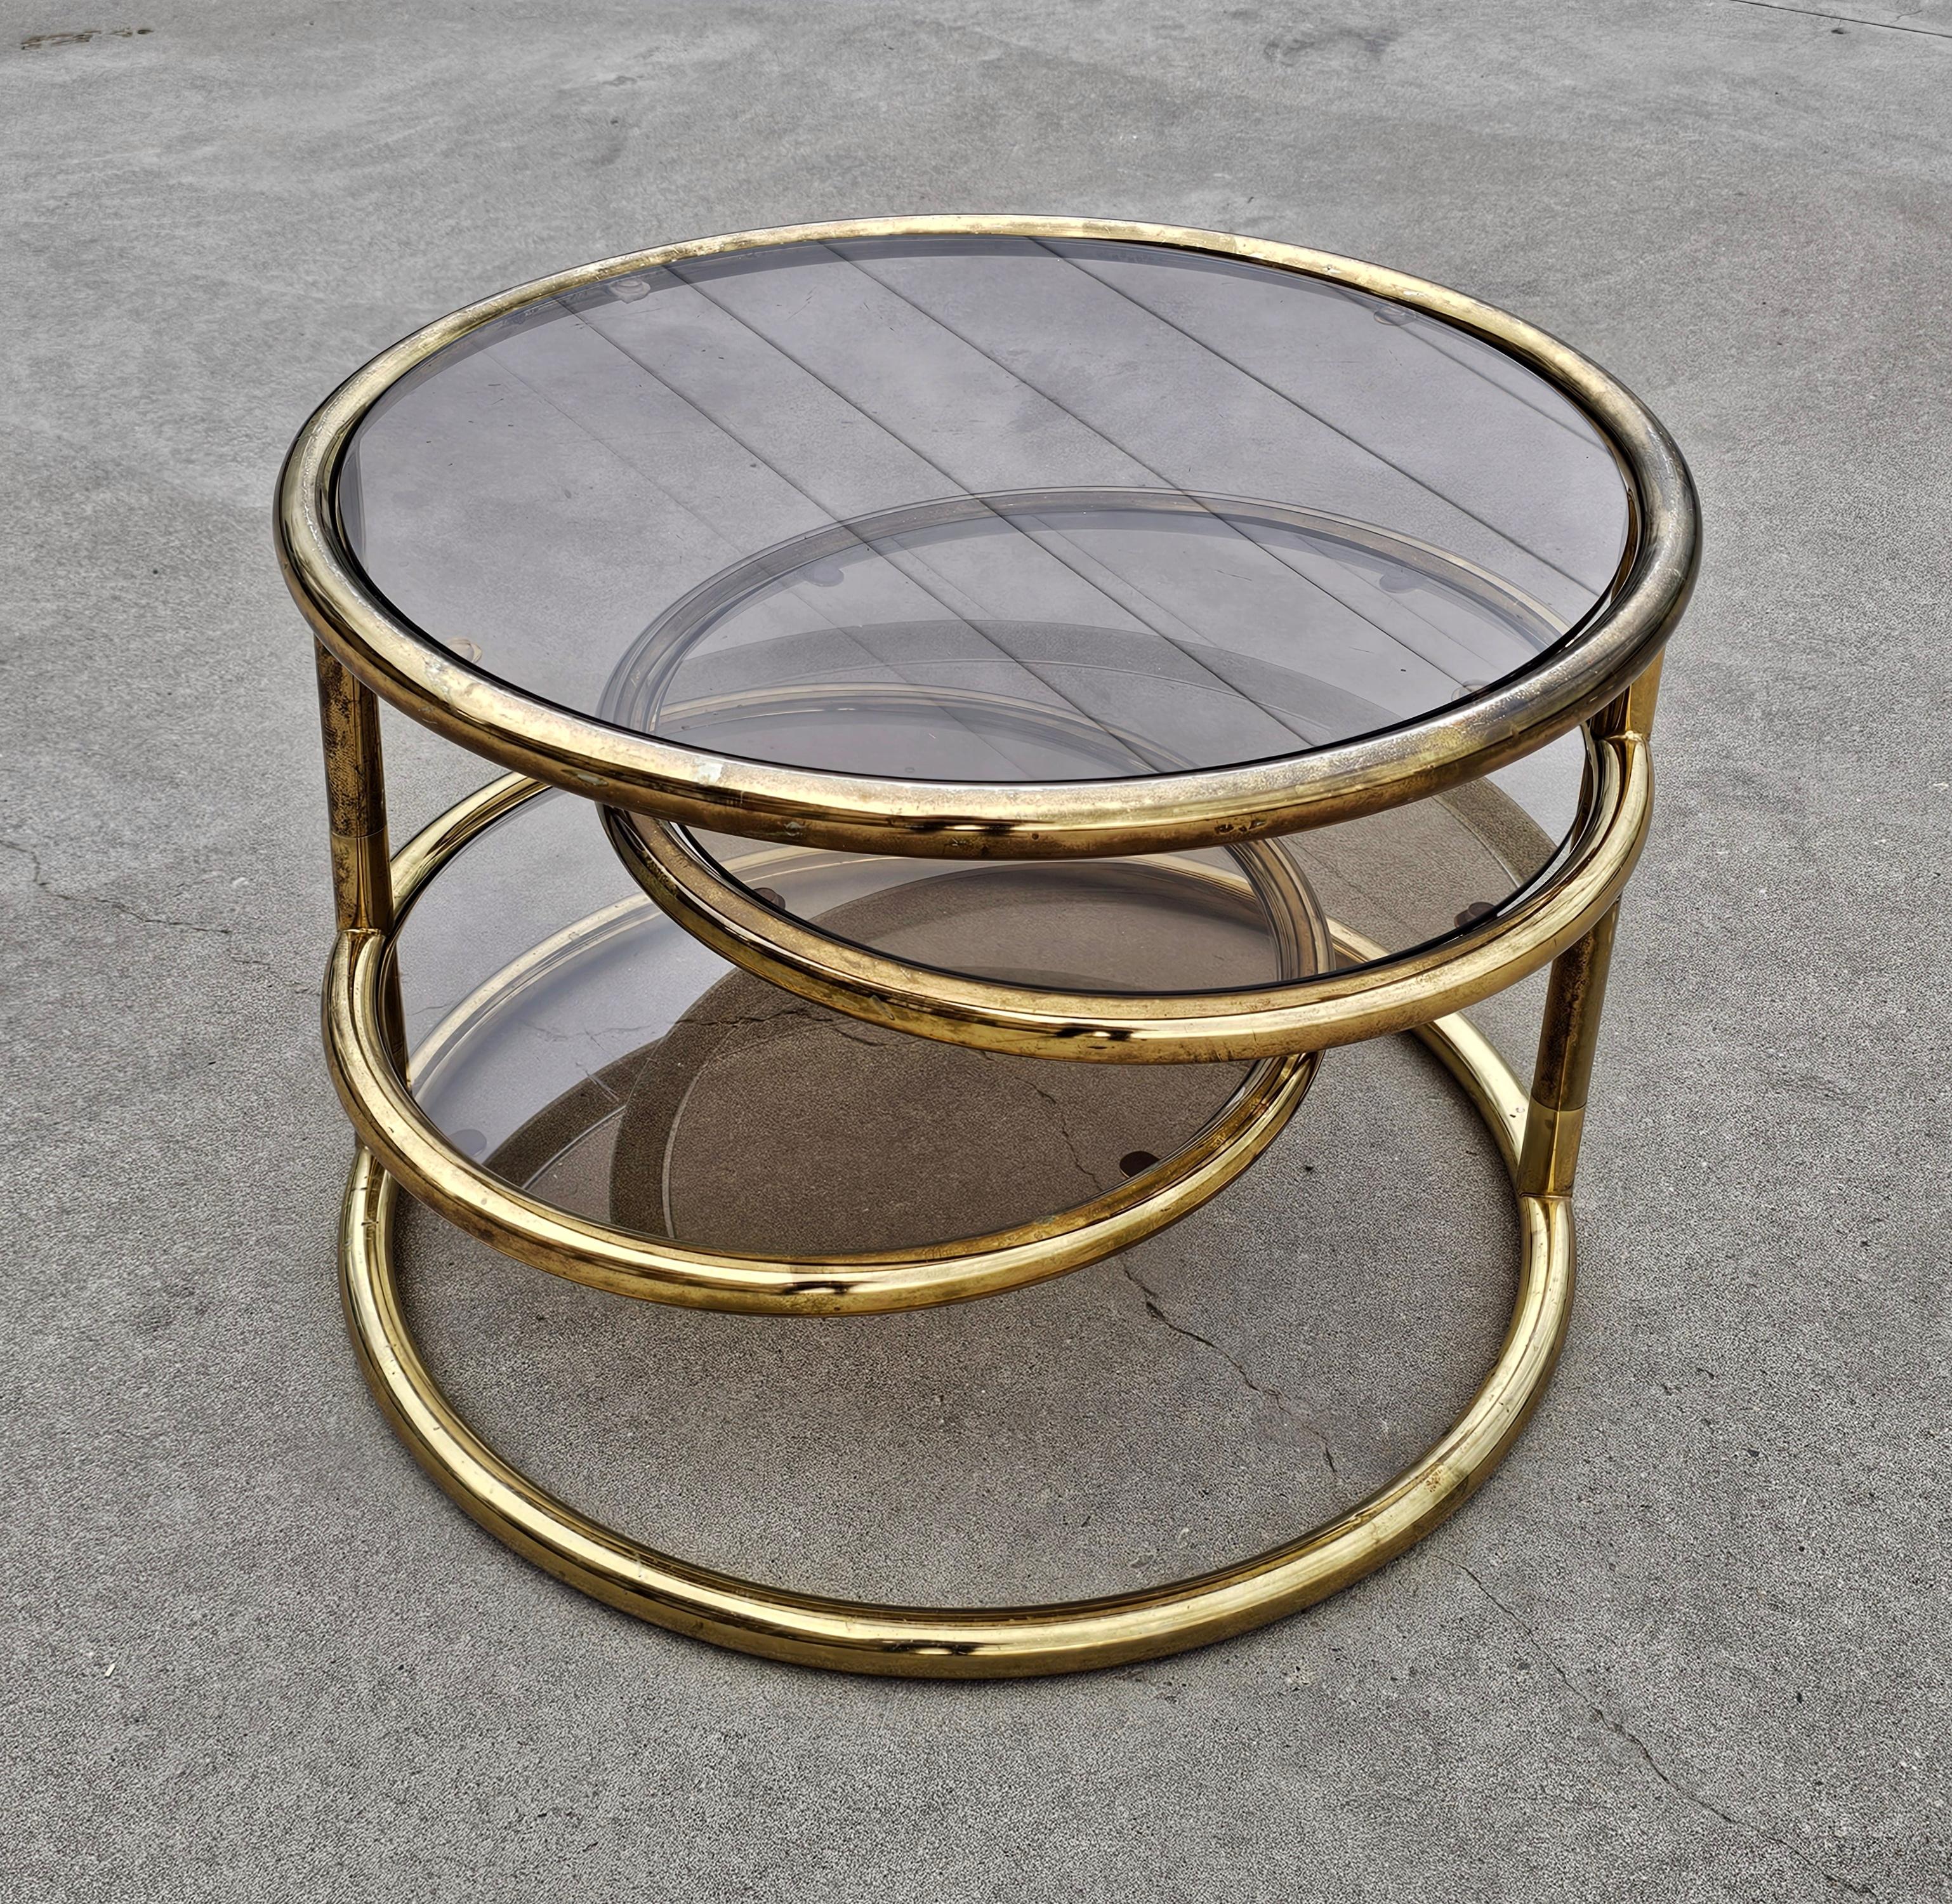 In this listing you will find a stunning Mid Century Modern swivel coffee table that many attribute to Milo Baughman. It is done in brass plated steel, which many mix with brass. Table features three circular tops done in smoked glass out of which